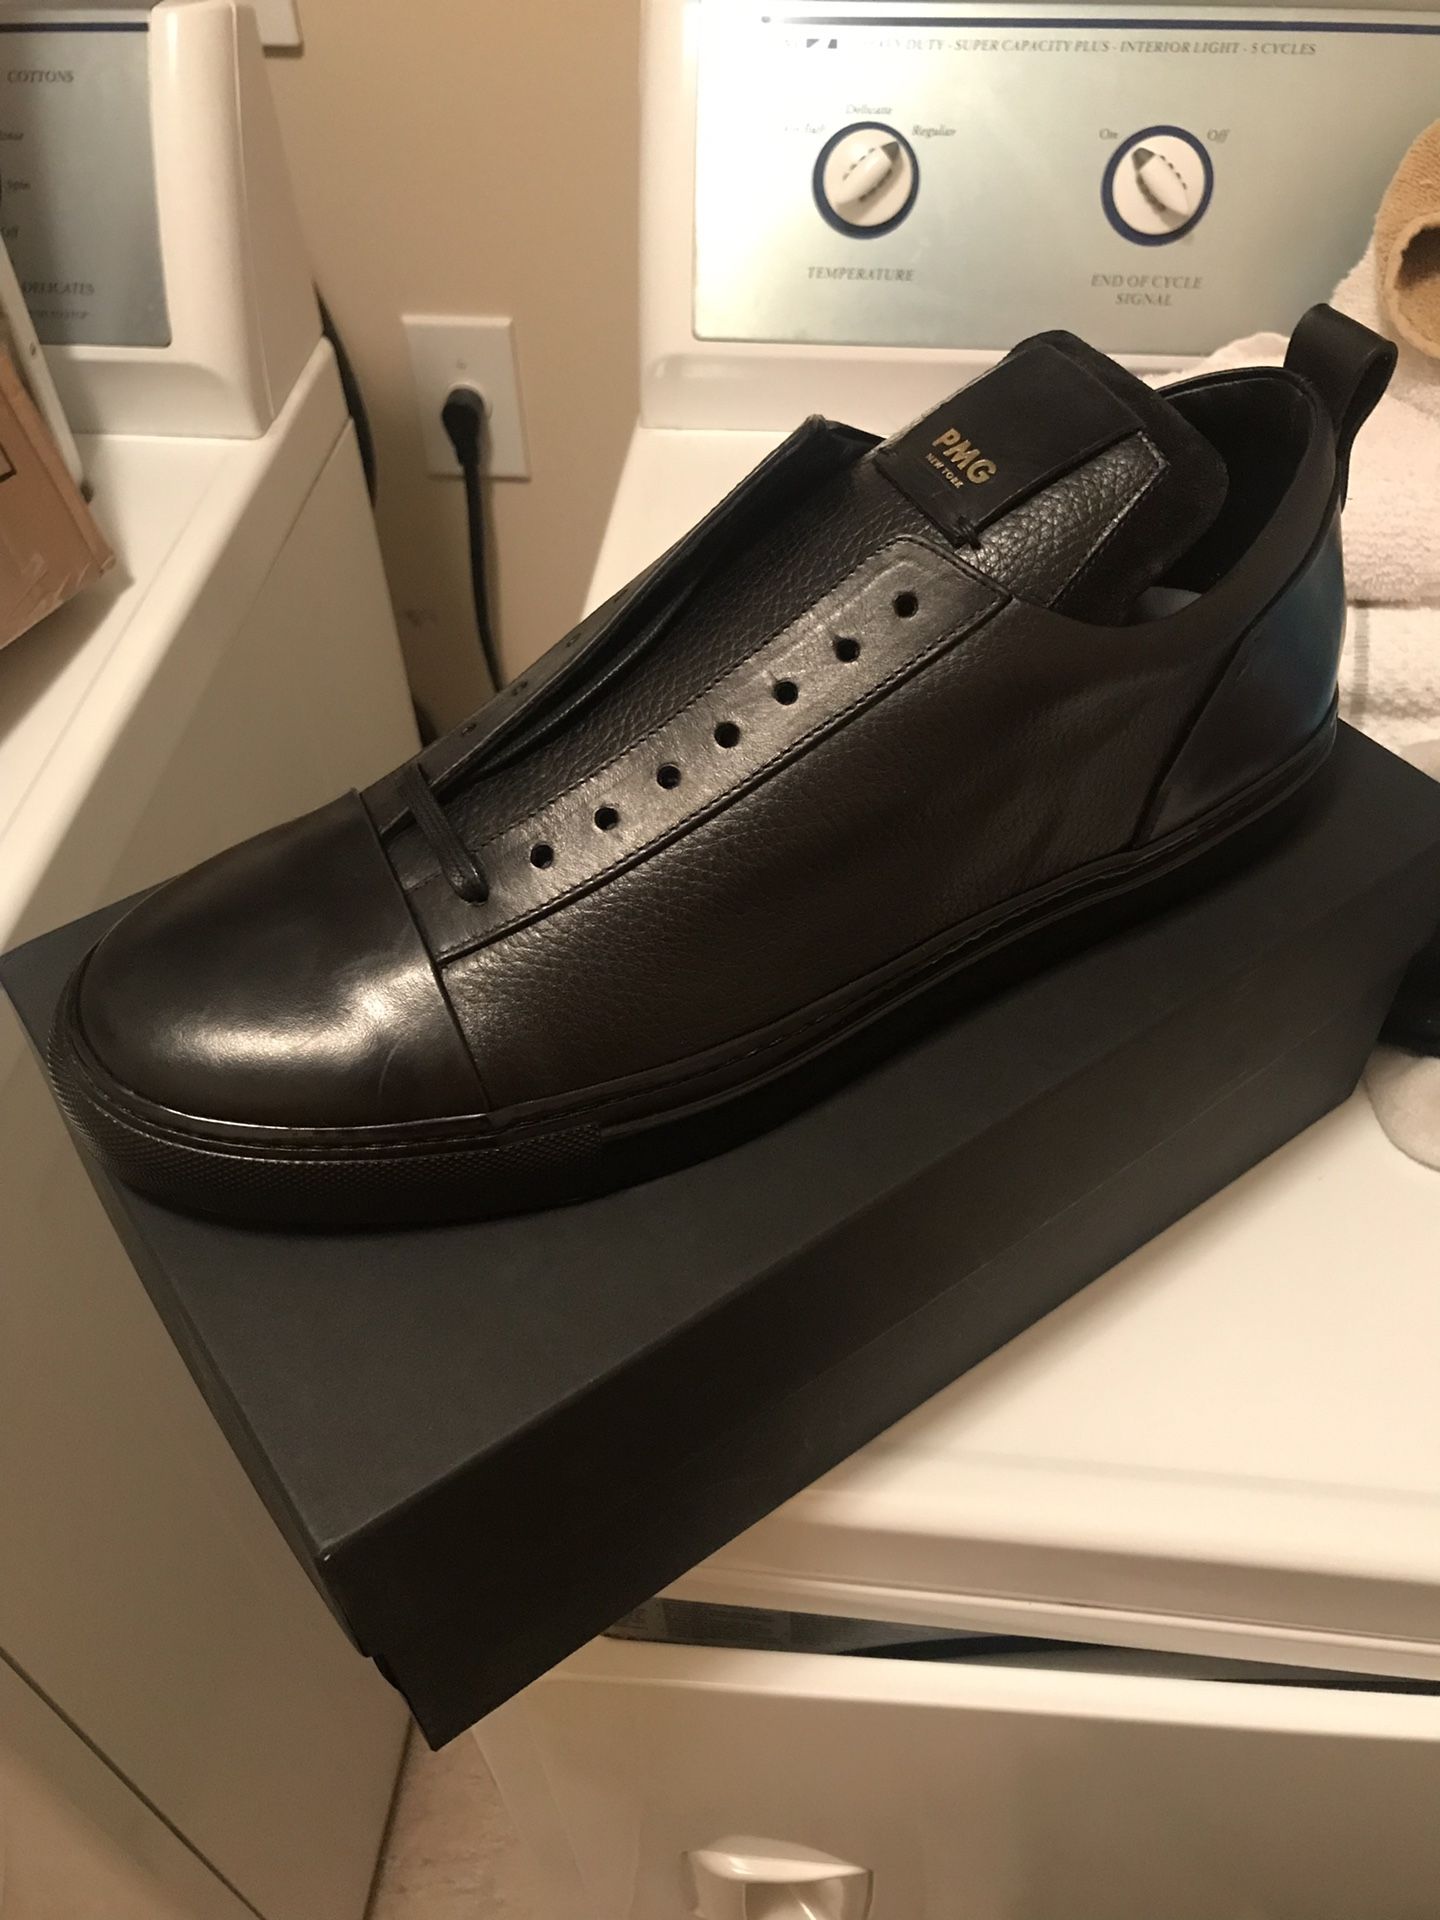 Luxury Shoe Brand PMG. Size 13 and Size 7